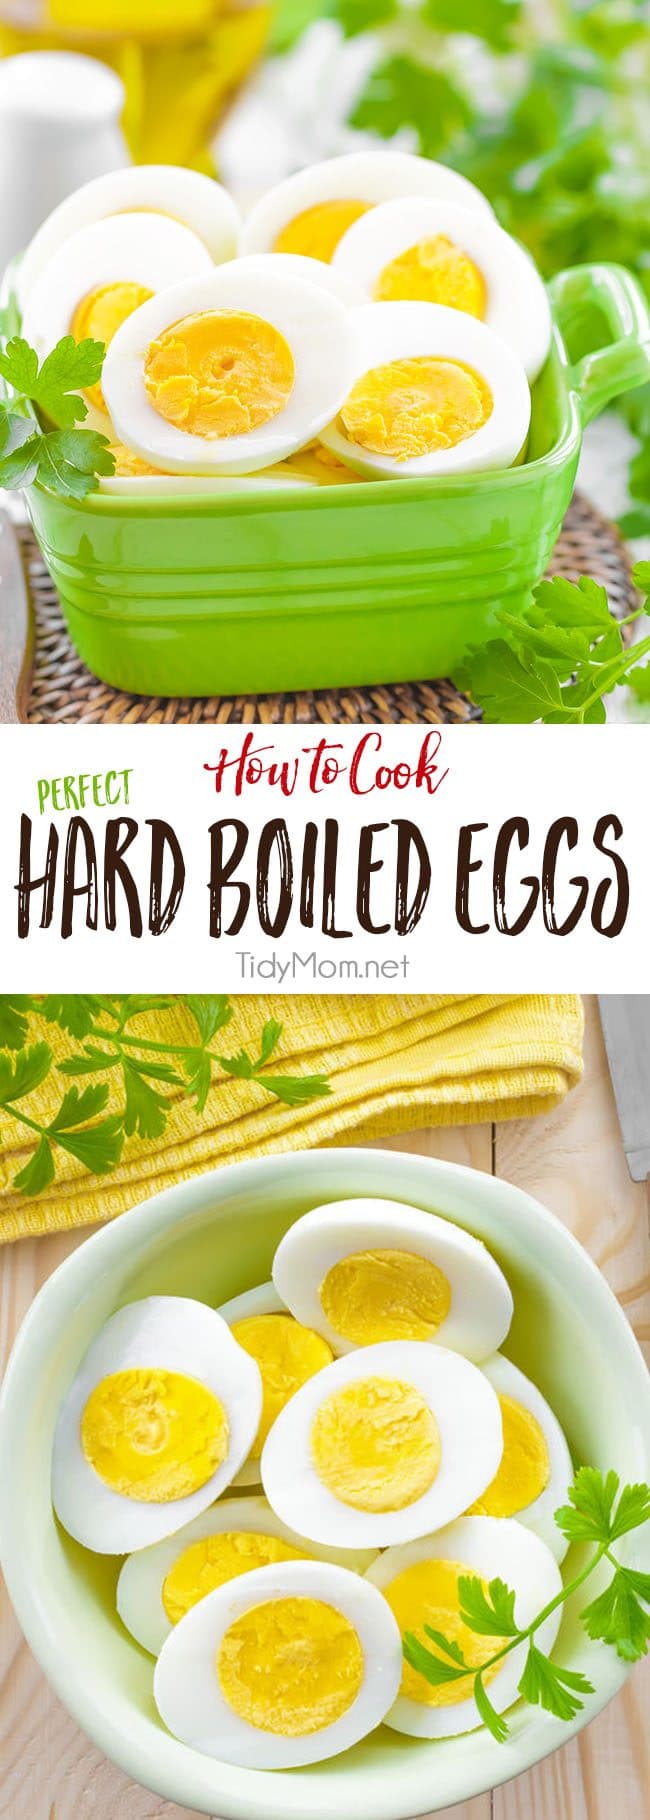 Since hard boiled eggs are notoriously easy yet difficult to master. Learn how to cook PERFECT HARD BOILED EGGS every time at TidyMom.net